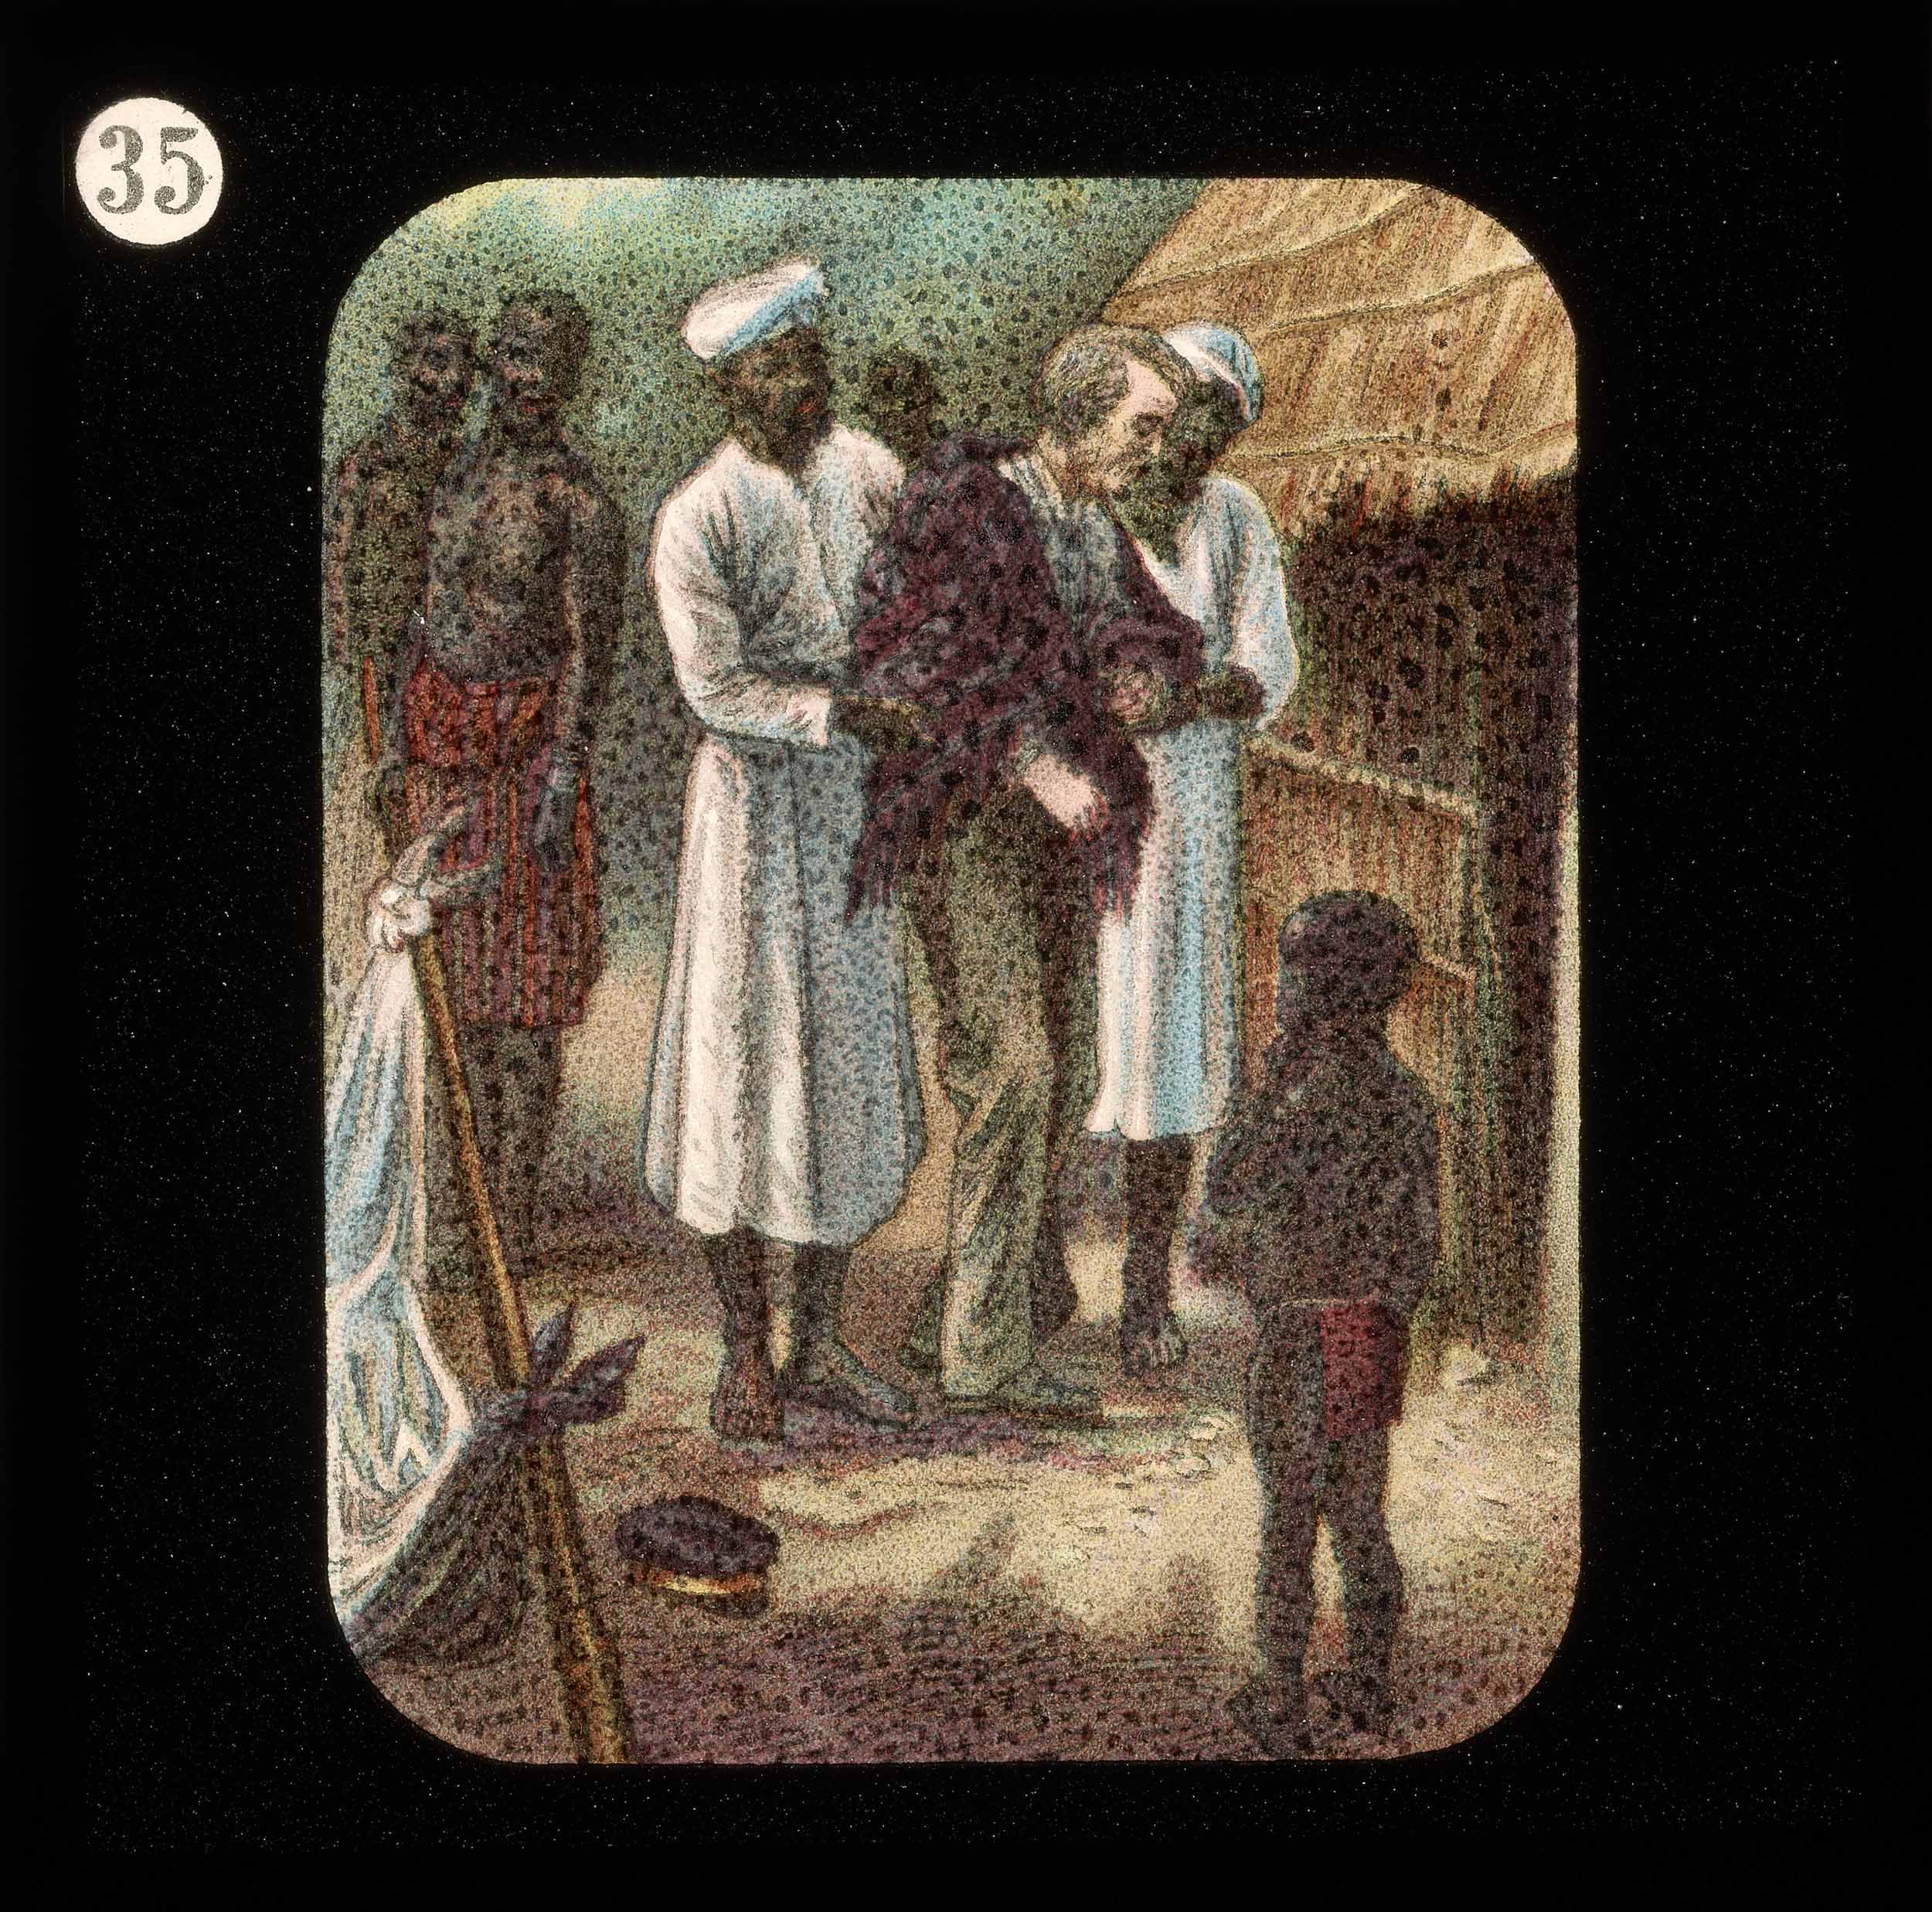 Unknown Creator, Lantern Slide of the Life, Adventures, and Work of David Livingstone, Date Unknown (c.1900). Courtesy of the Smithsonian Libraries, Washington, D.C. During his last journey (1866-73), Livingstone continuously relied on his African and Arab companions to support all aspects of his travels. These slides romanticize that relationship, while other depictions ignore it altogether.